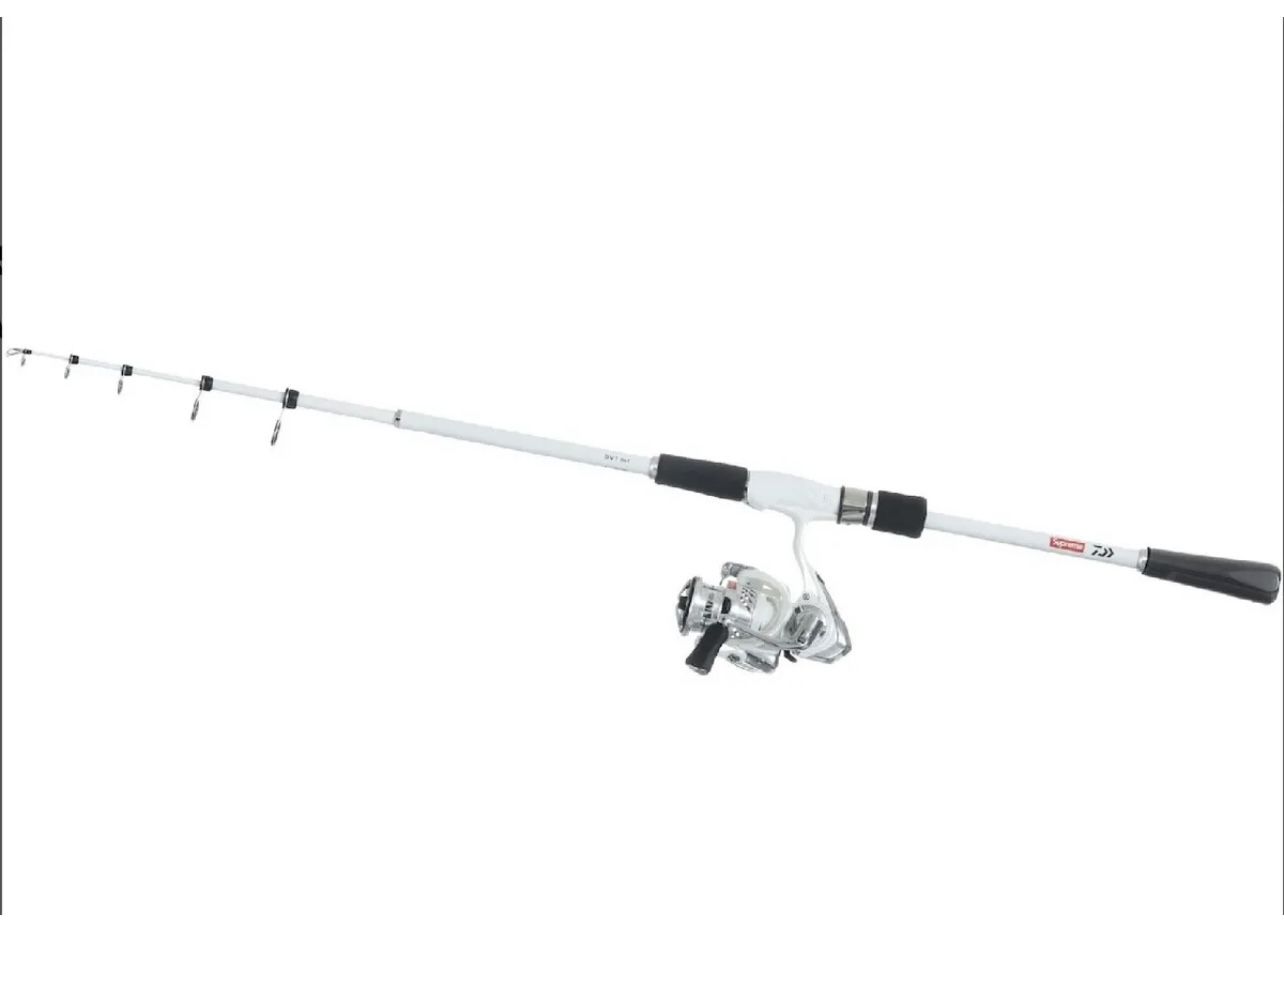 NEW Supreme x Daiwa DV1 Fishing Rod And Reel SS23 for Sale in